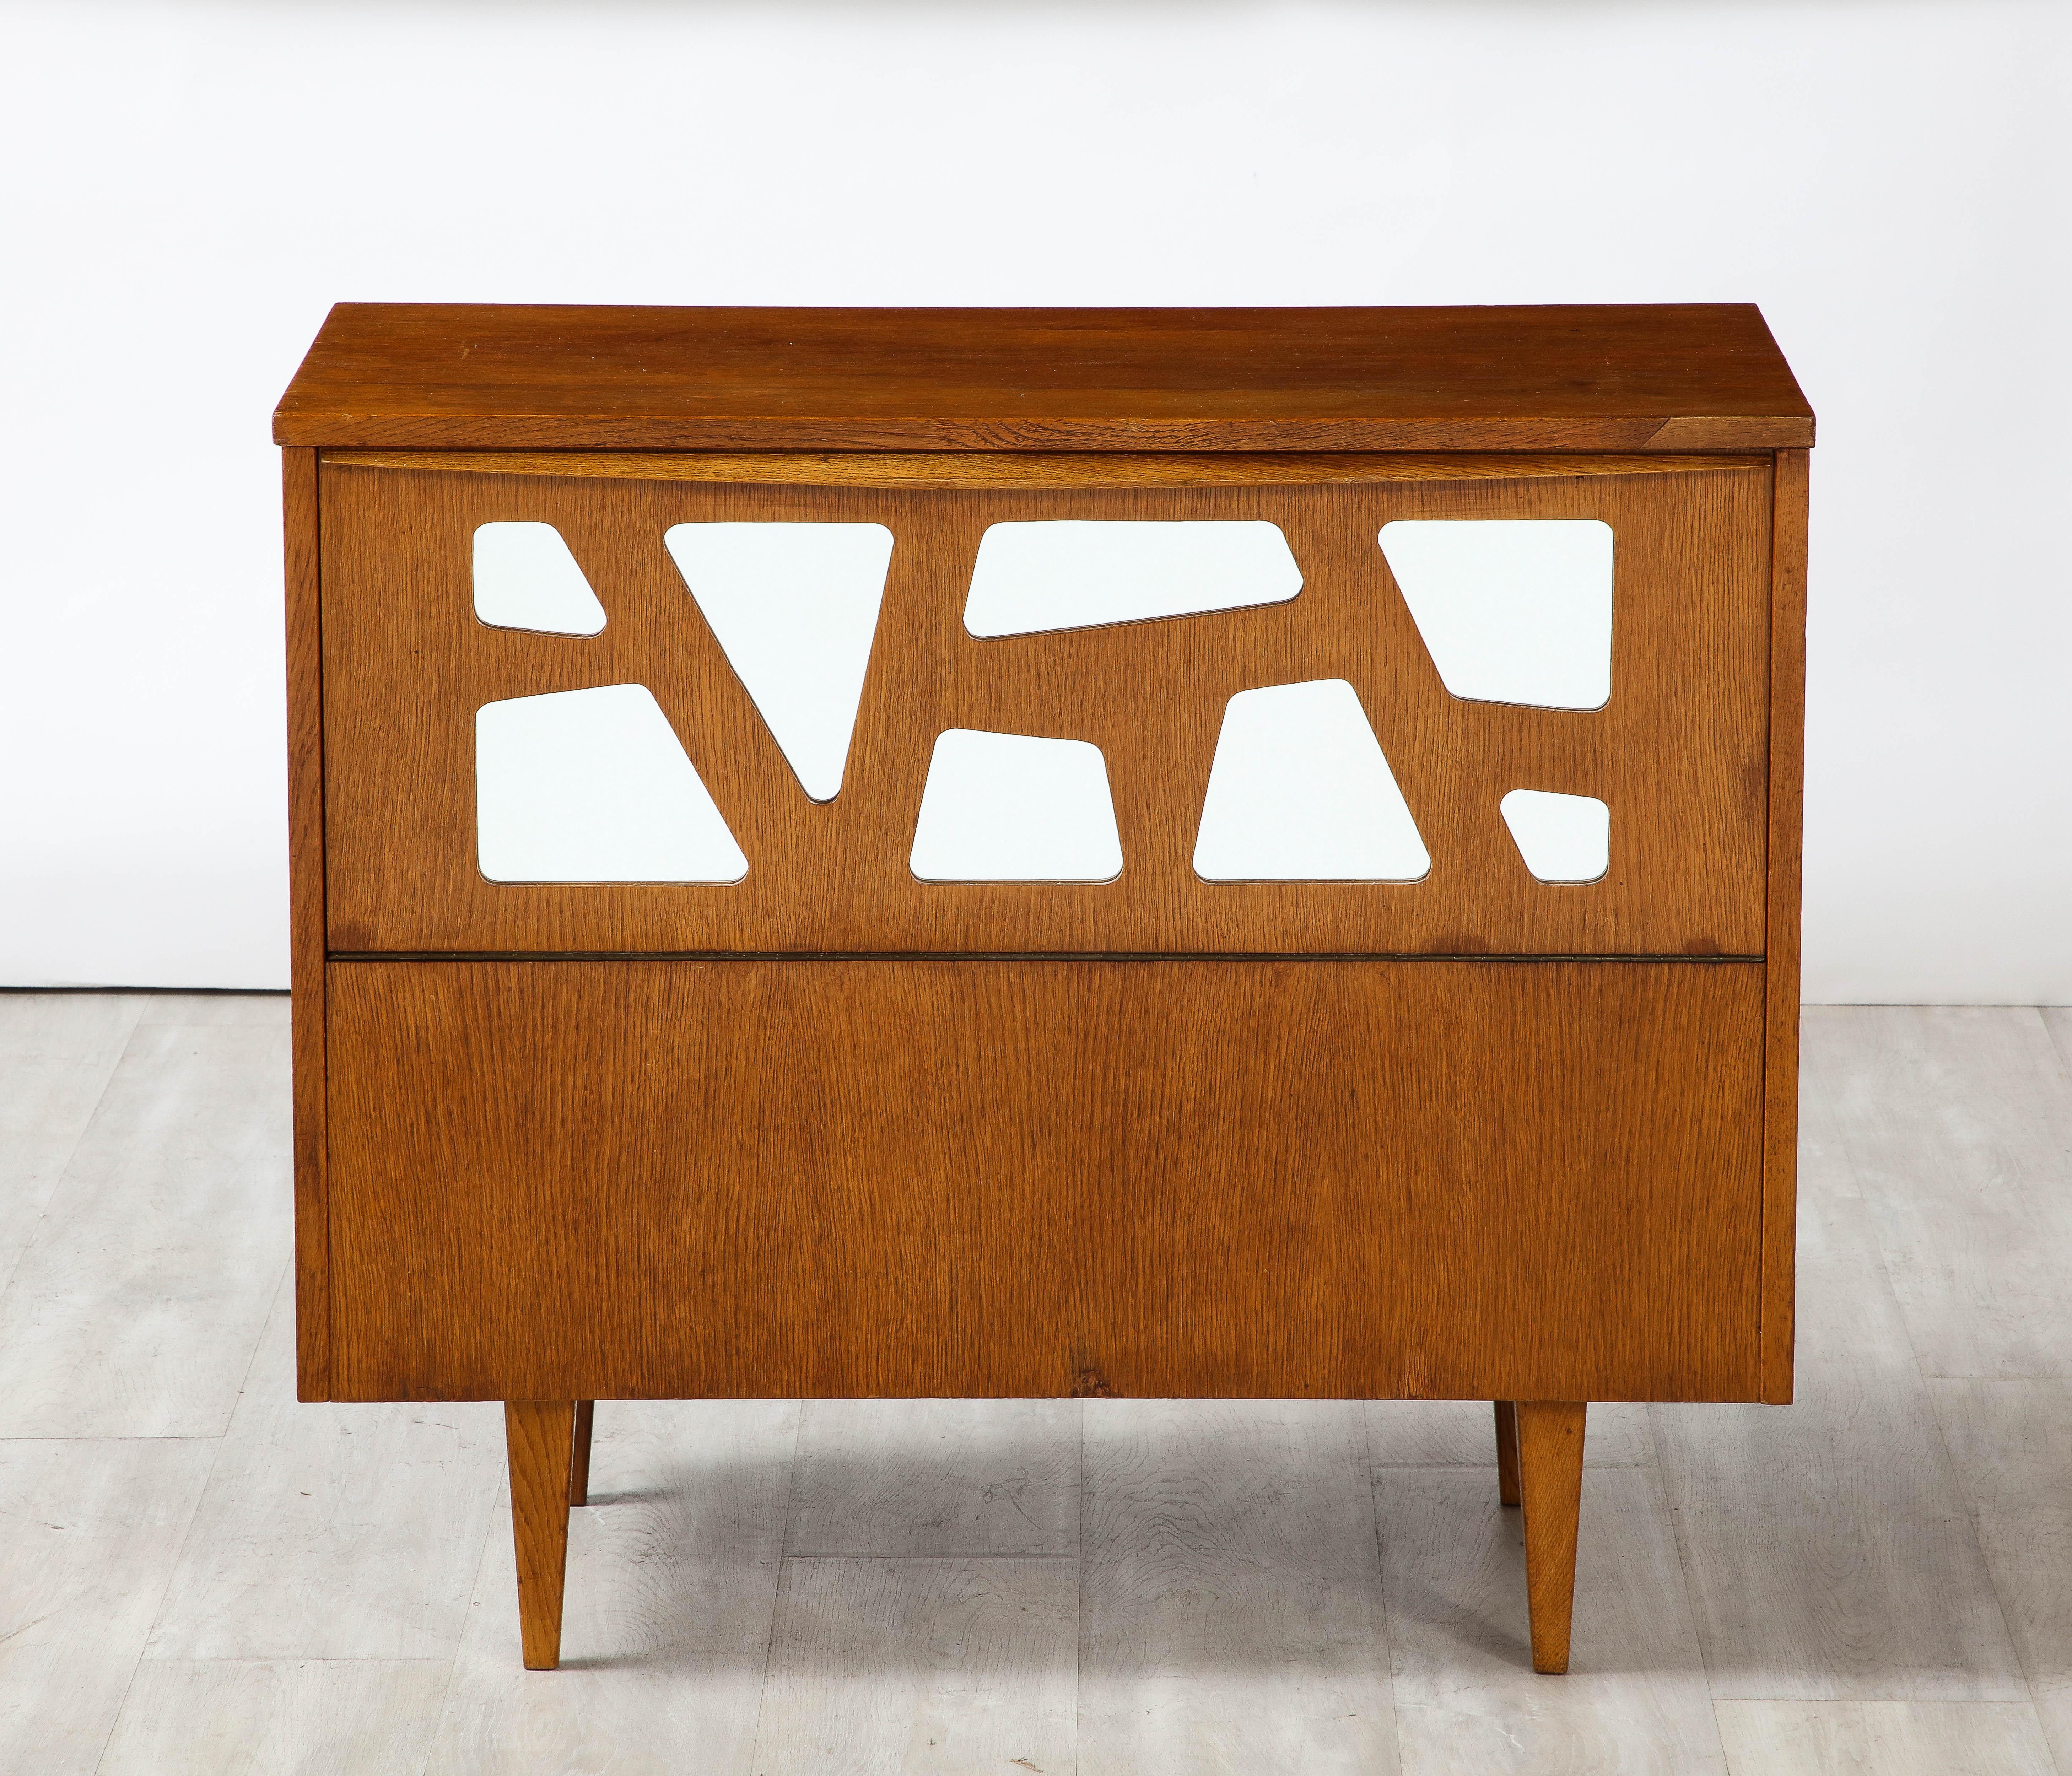 A pair of Gio Ponti attributed oak cabinets, this rare and unique pair feature an upper portion which opens out and is decorated with a modernist geometric cut out motif, the geometric shapes are inset with glass. The warmth of the oak contrasts